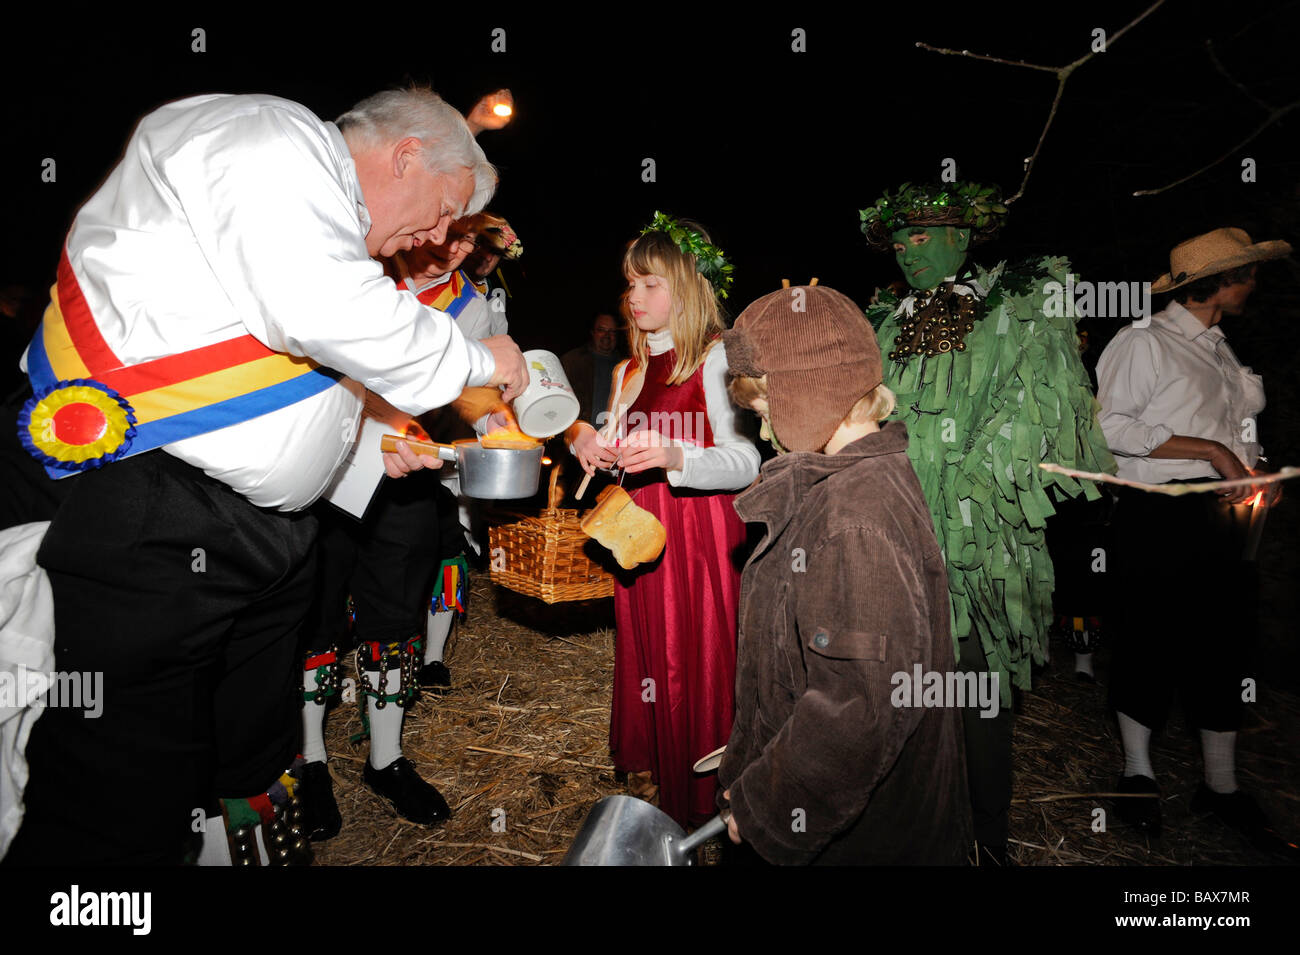 Mendip Morris Men pour cider onto toast for the Wassail Queen during Thatchers Cider Wassailing event Stock Photo